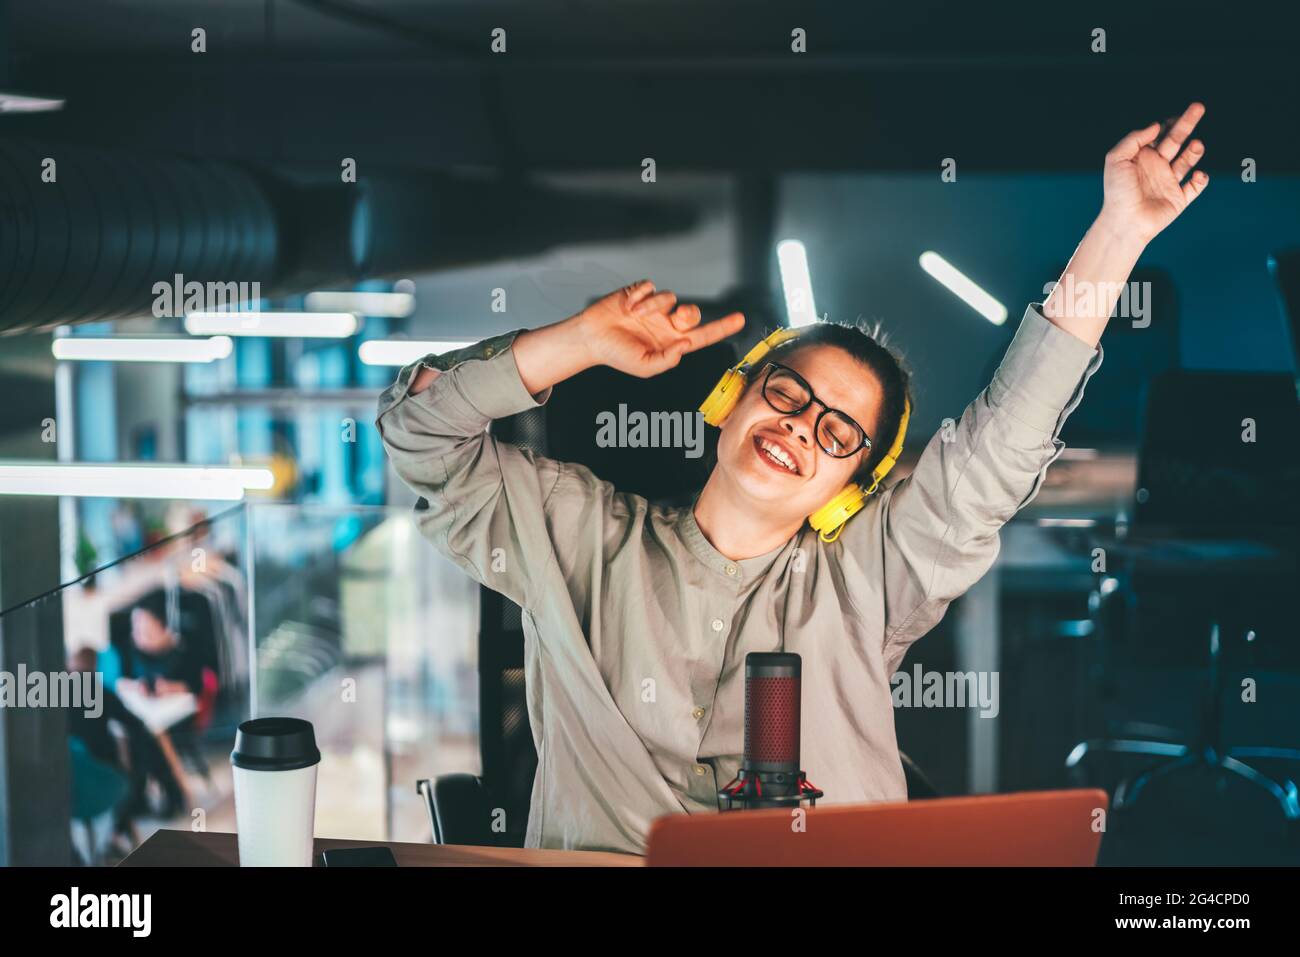 Attractive young woman in her 30s wearing glasses and yellow headphones. Happy singing and dancing at her workplace with her hands raised up, portrait Stock Photo